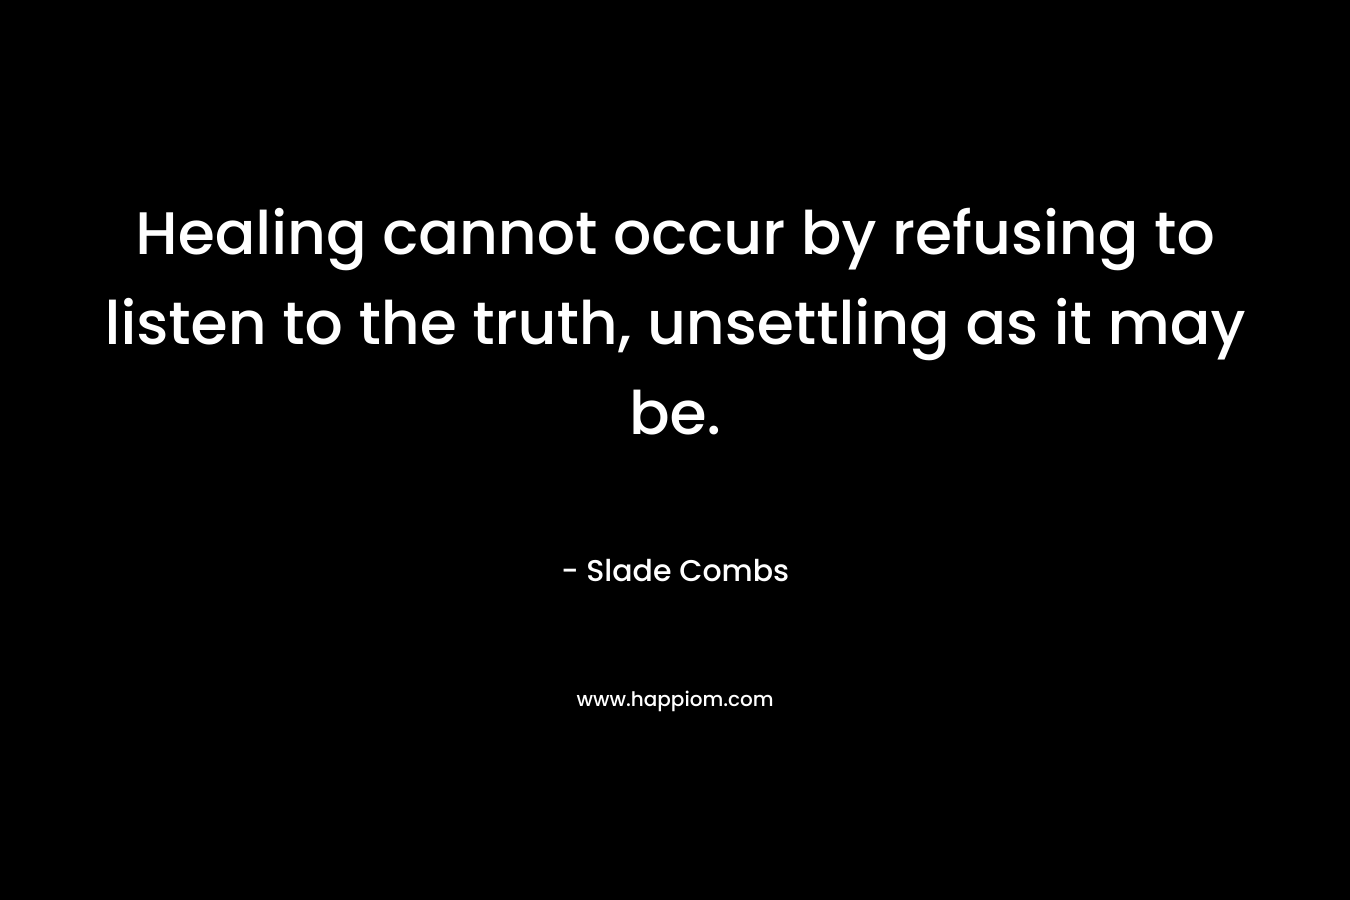 Healing cannot occur by refusing to listen to the truth, unsettling as it may be. – Slade Combs